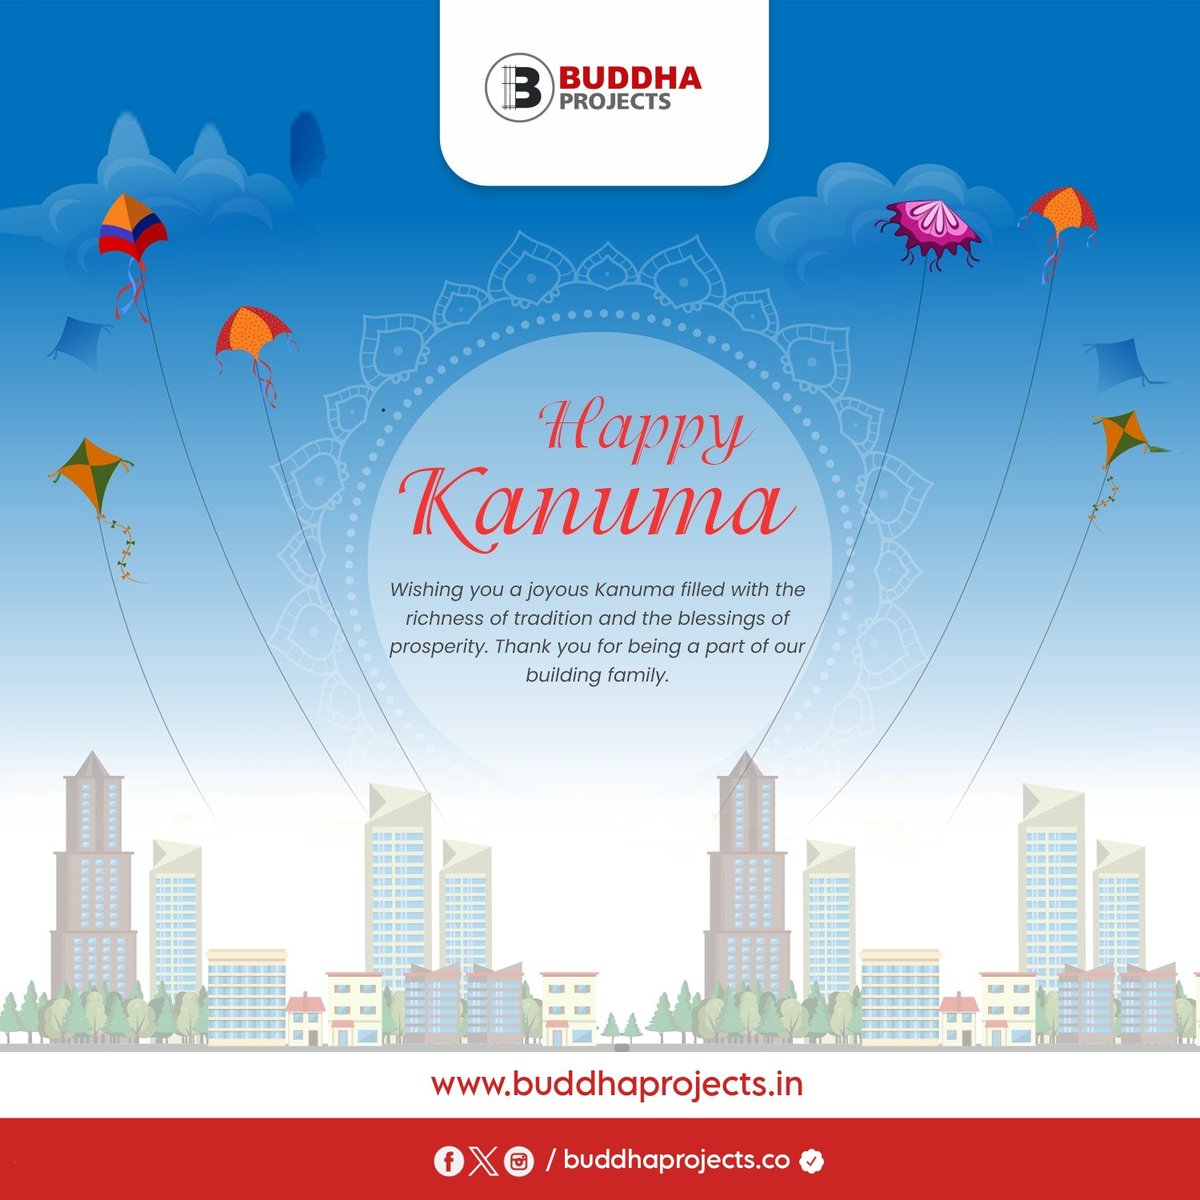 Buddha projects wishing you and your family a very Happy Kanuma 💗

Contact us for all types of structural designs for Construction.                               

Er. Raja Gowtham
7095292505

#buddhaprojects #kanuma #rajagowtham #Hyderabad #structuraldesigns